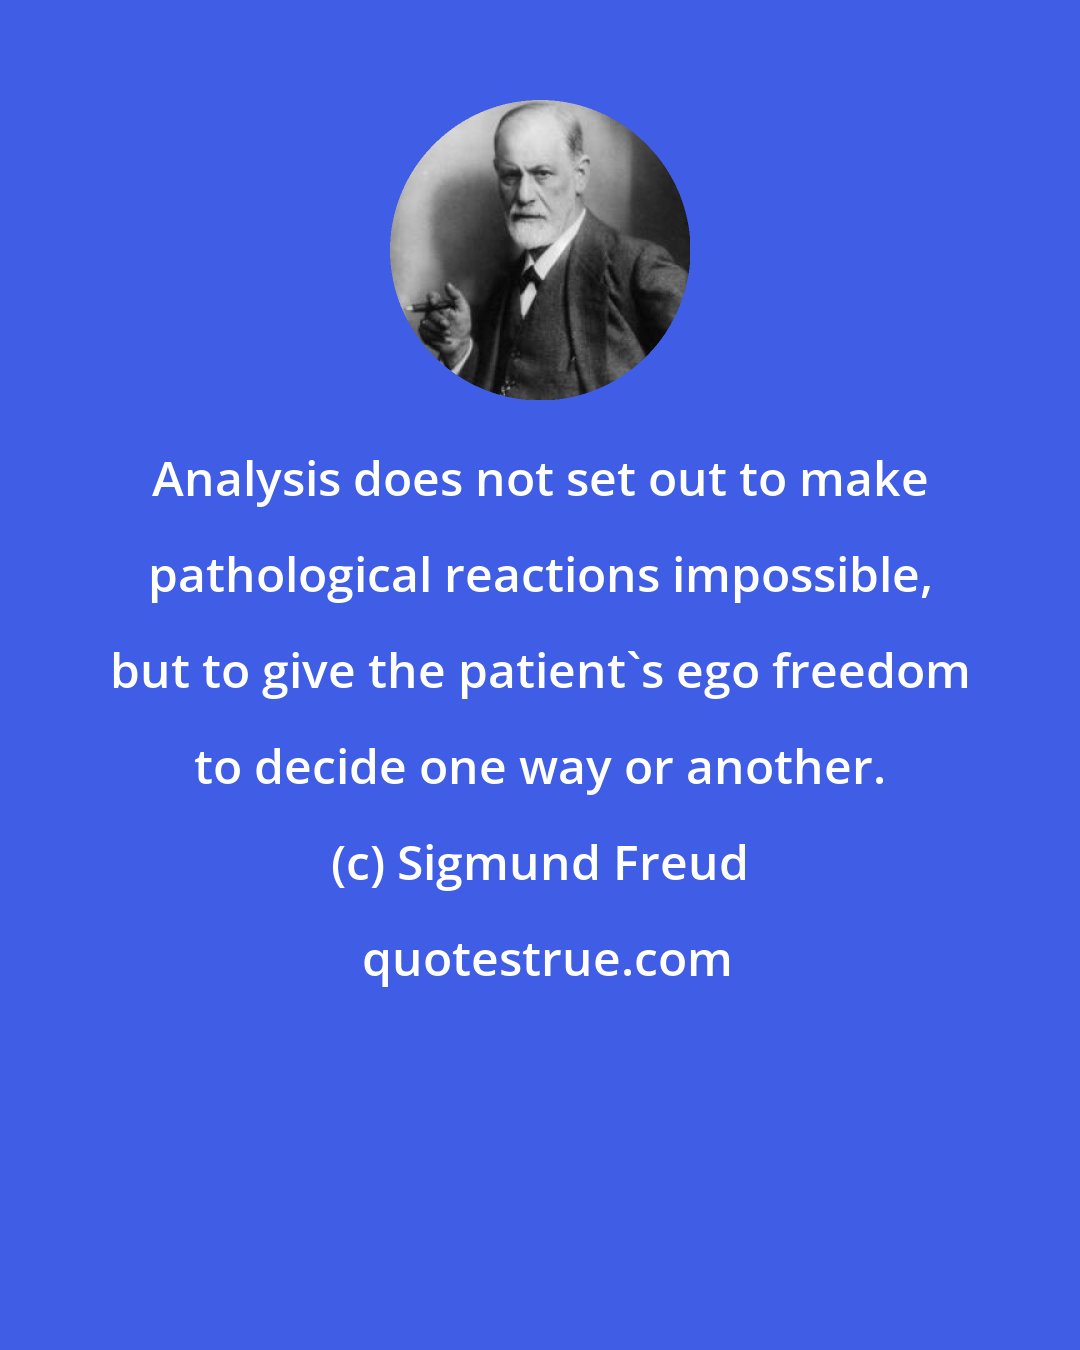 Sigmund Freud: Analysis does not set out to make pathological reactions impossible, but to give the patient's ego freedom to decide one way or another.